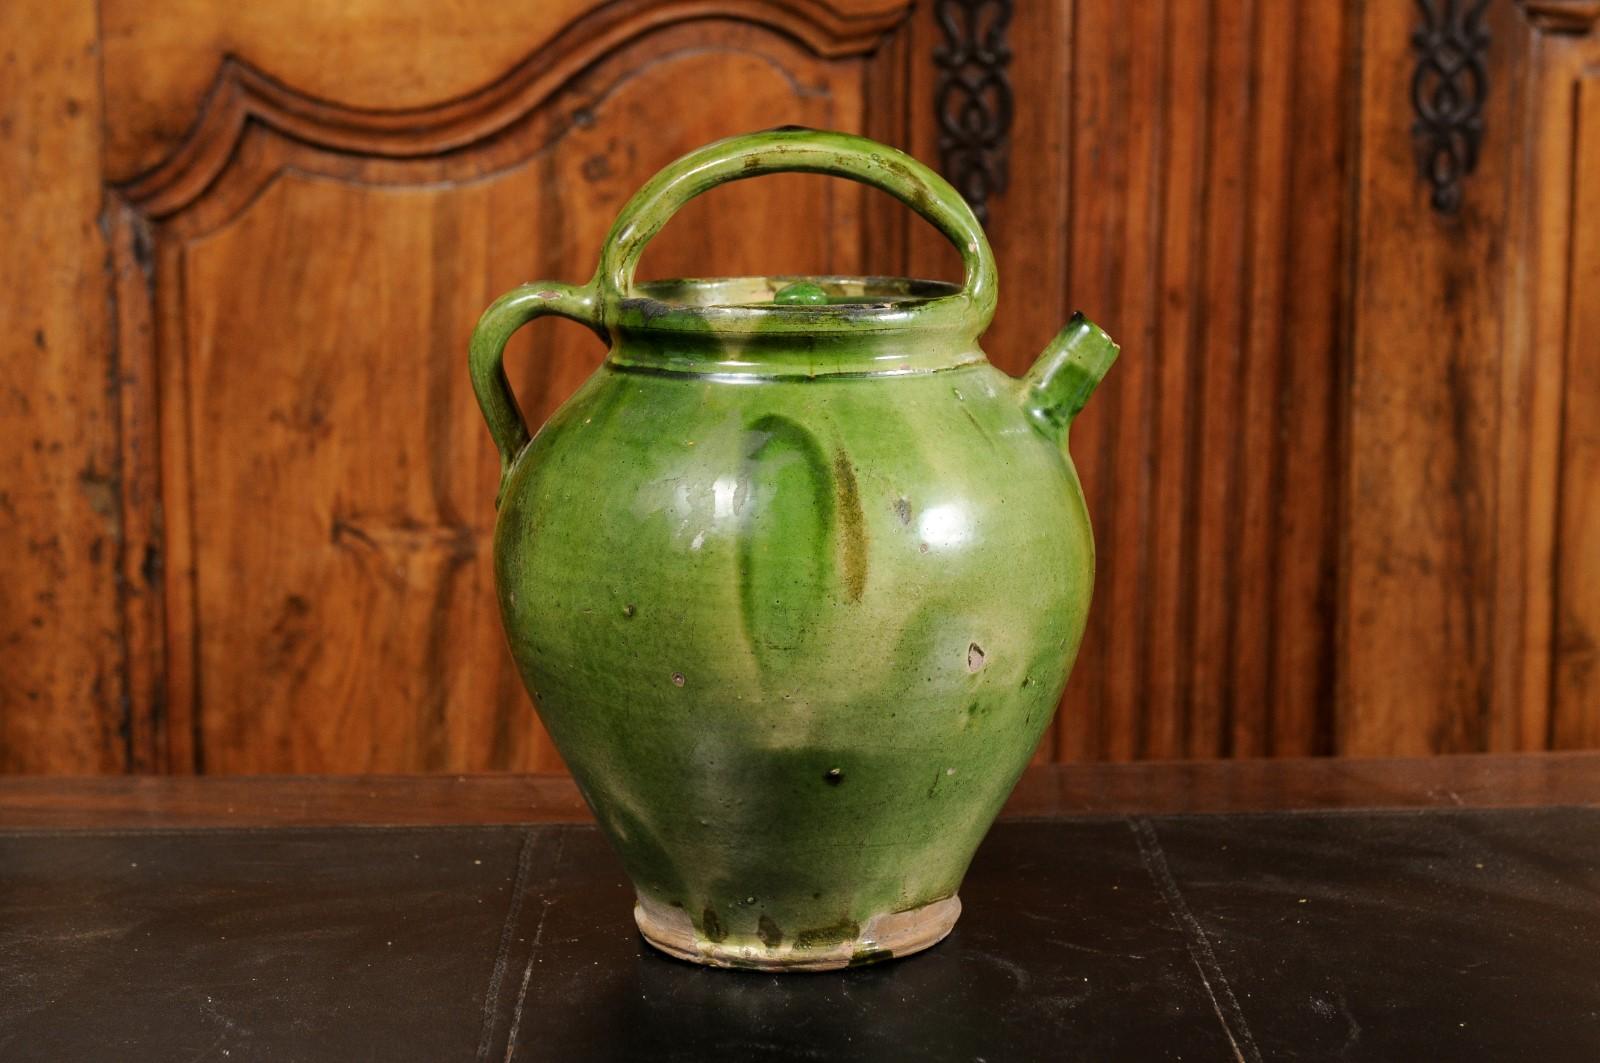 A French Provincial pottery olive oil lidded jug from the 19th century, with green glaze, two handles and distressed patina. Created in Southern France during the 19th century, this olive oil jug features a green glazed finish perfectly